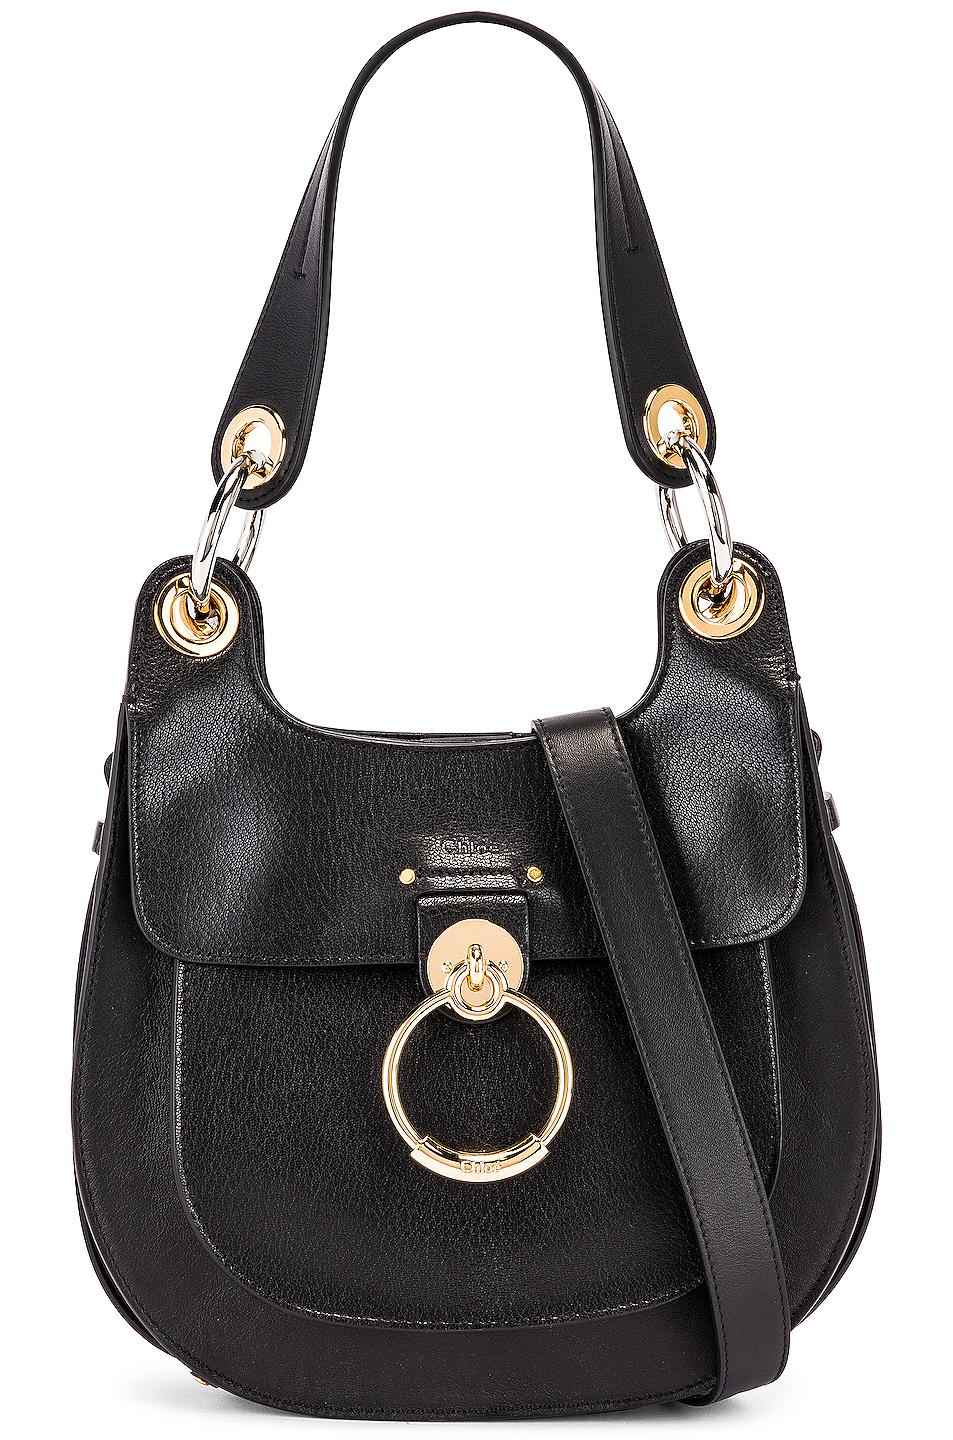 Chloé Small Tess Leather Hobo Bag in Black - Lyst